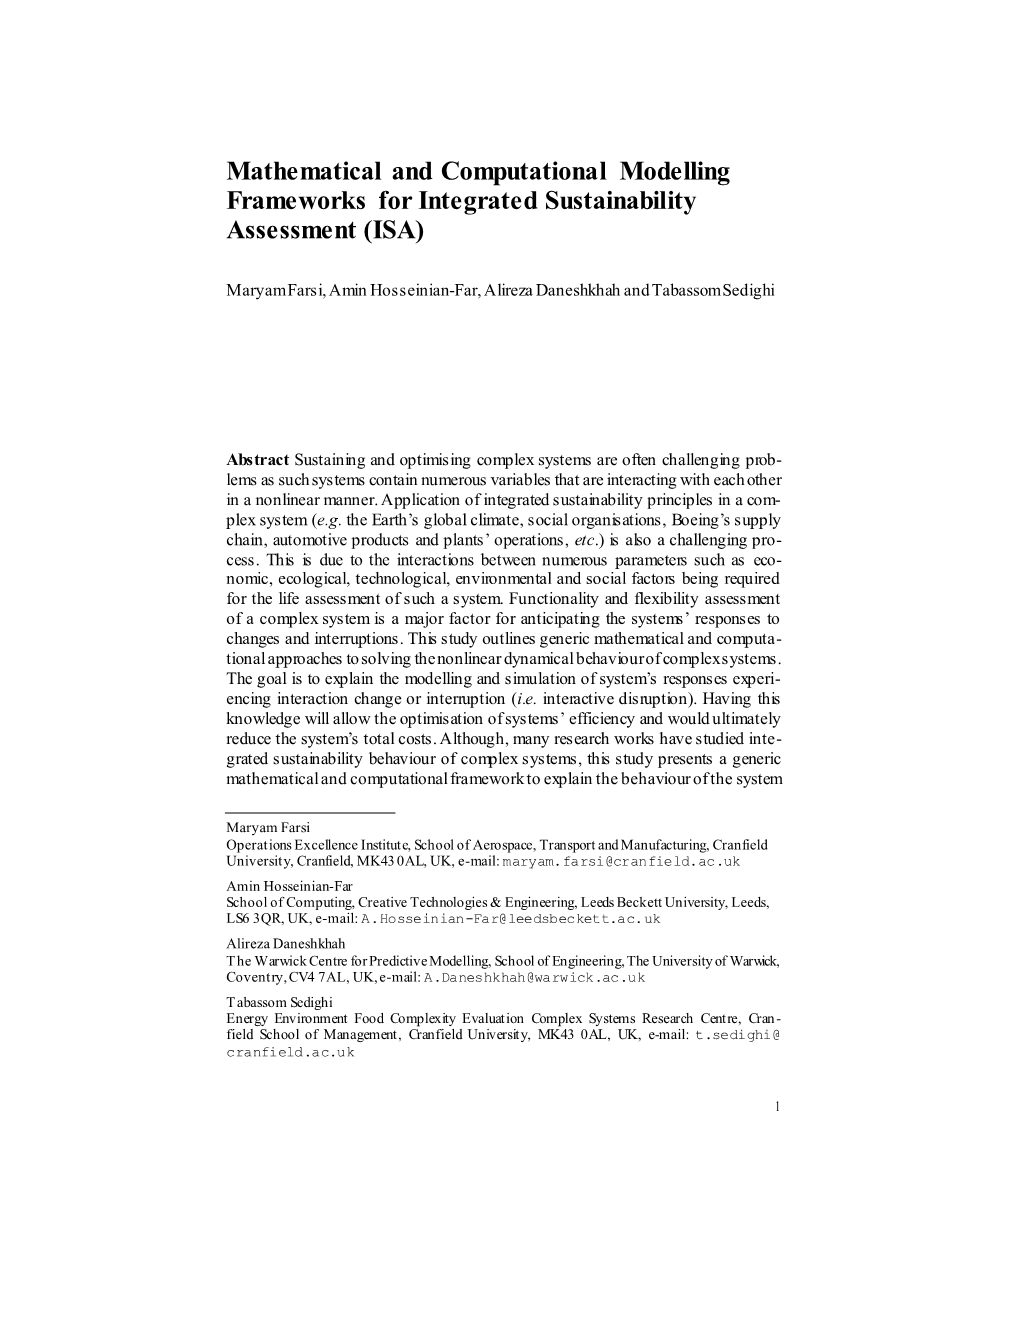 Mathematical and Computational Modelling Frameworks for Integrated Sustainability Assessment (ISA)